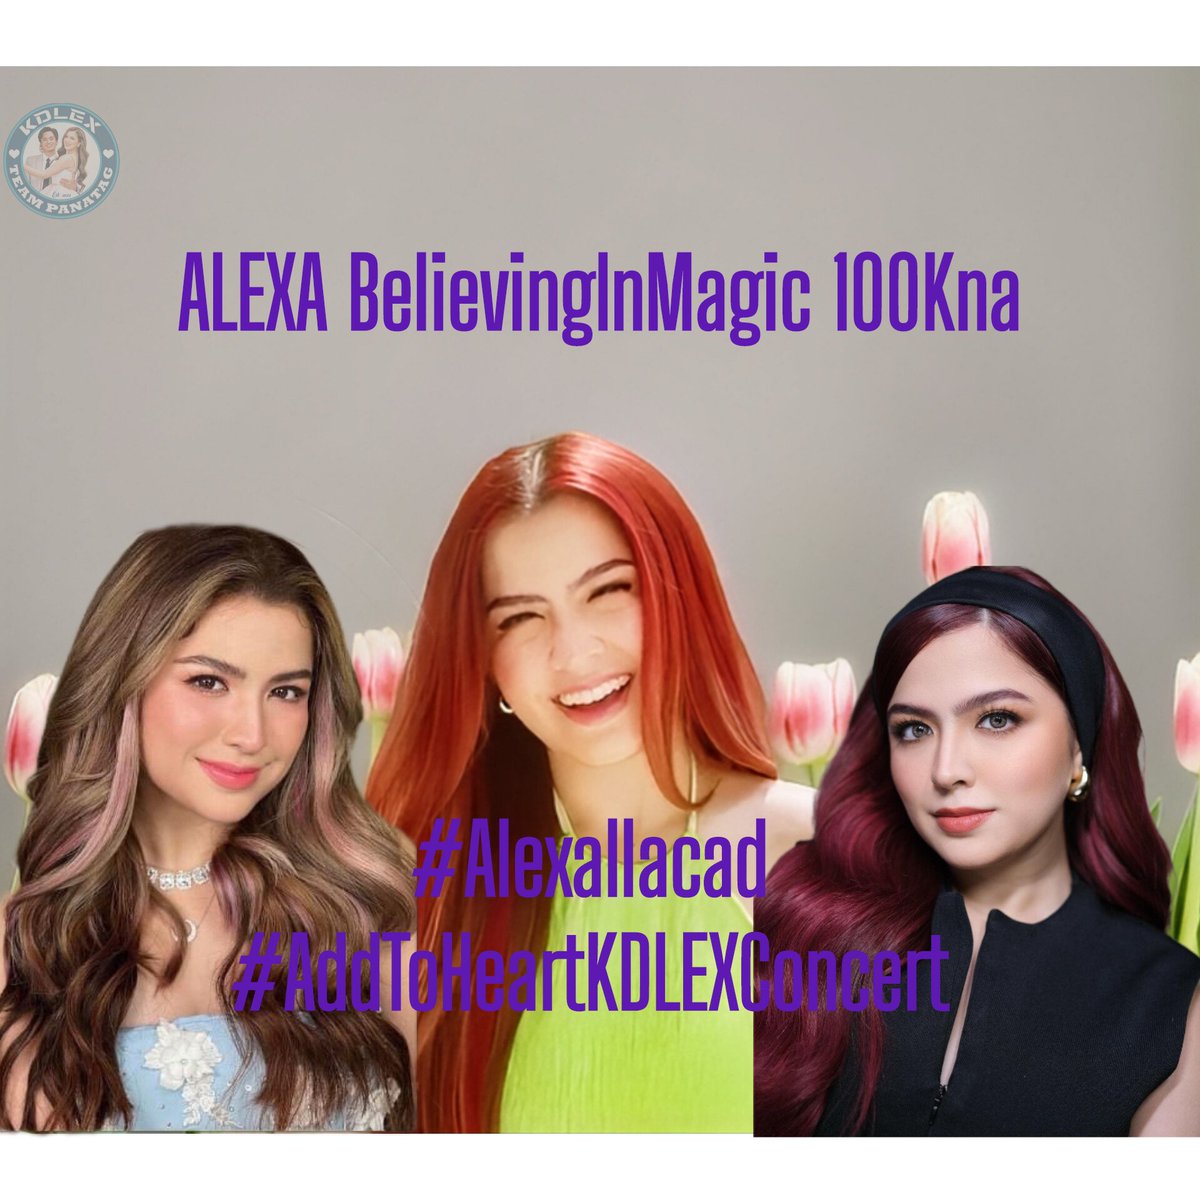 XPARTY STARTS!

OFFICIAL TAGLINE:

ALEXA BelievingInMagic 100Kna

#AlexaIlacad 
#AddToHeartKDLEXConcert

TP Reminders: 
- No numbers 
- Minimum of three words per tweet
- No emojis
- No all caps

Kindly drop the tag if you see this tweet. Thank you! 

REPLY | RETWEET | QRT